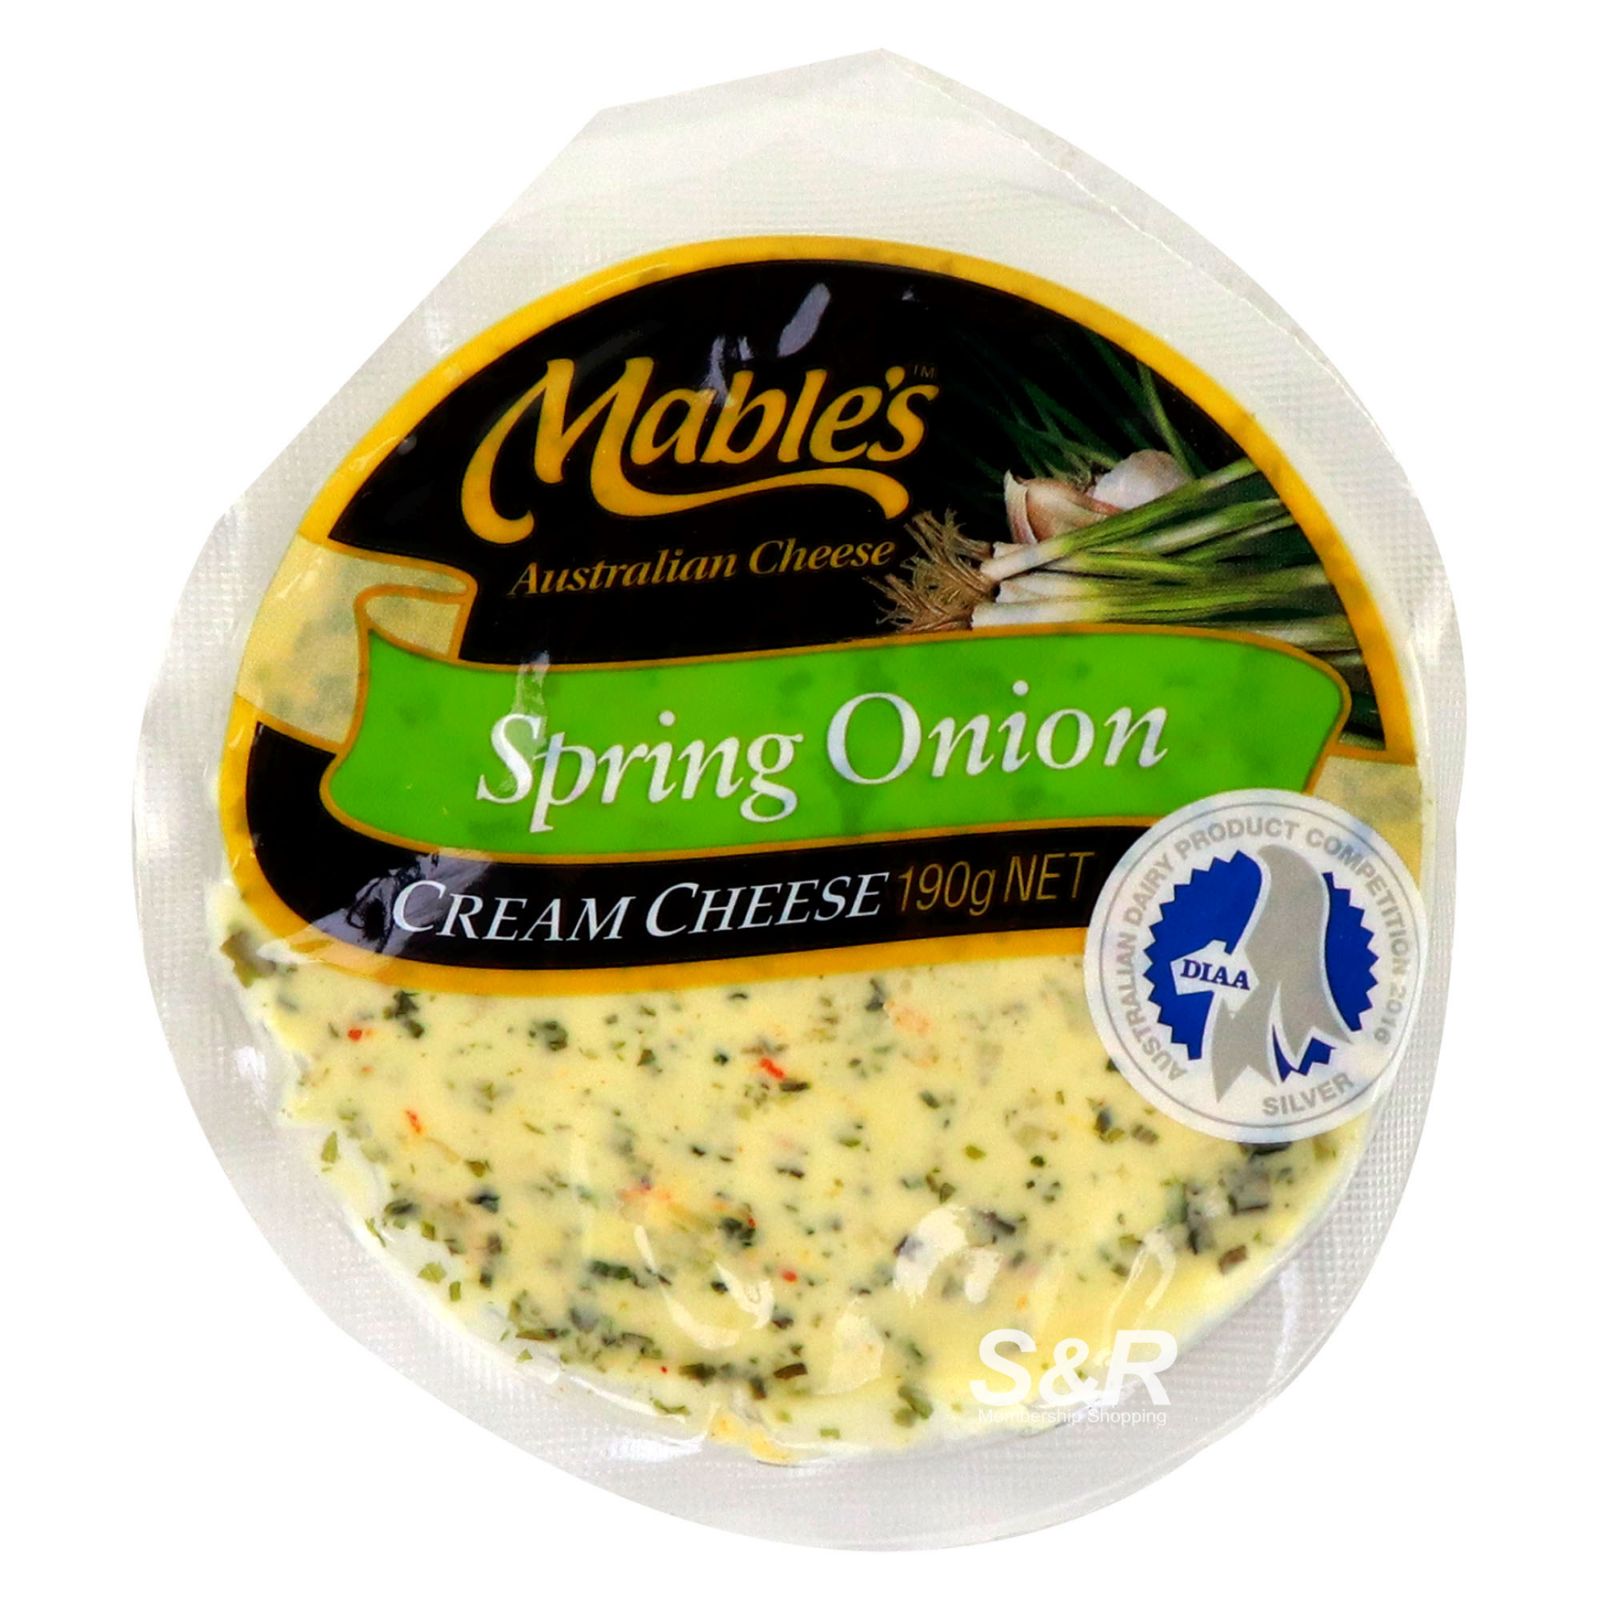 Mable's Spring Onion Cream Cheese 190g